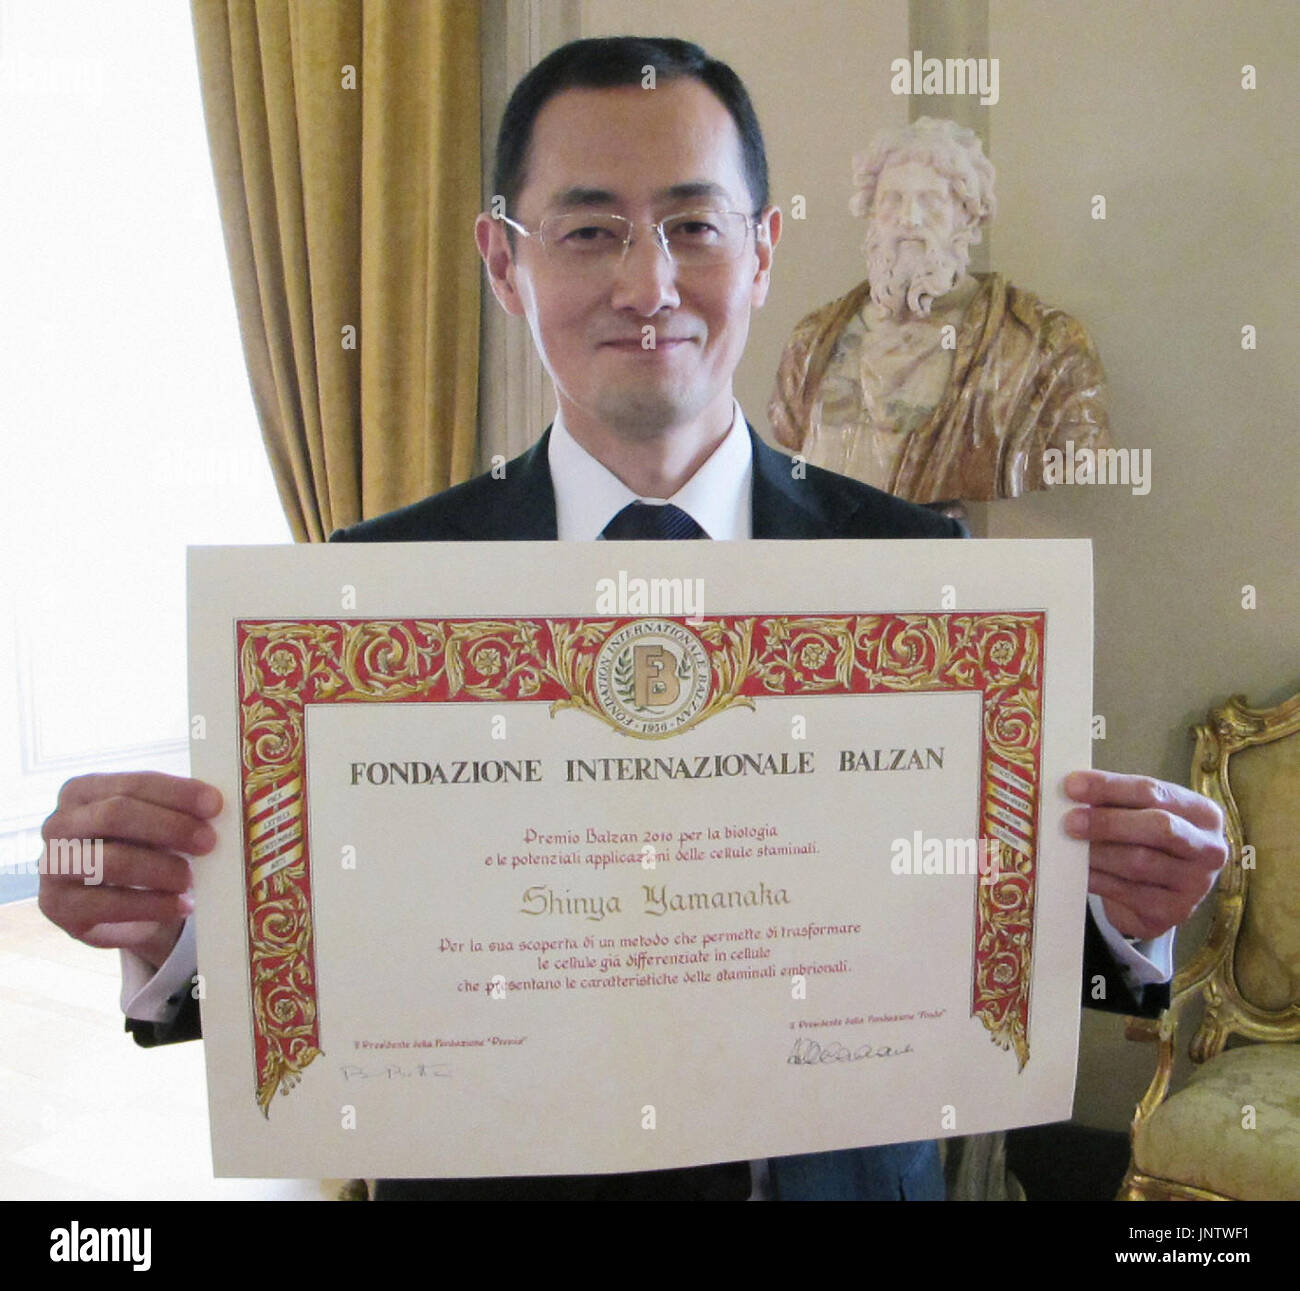 ROME, Italy - Shinya Yamanaka, professor at Kyoto University, holds up a certificate for the Balzan Prize in Rome on Nov. 19, 2010, after winning the award for his pioneering work in producing induced pluripotent stem cells, or iPS cells. (Kyodo) Stock Photo